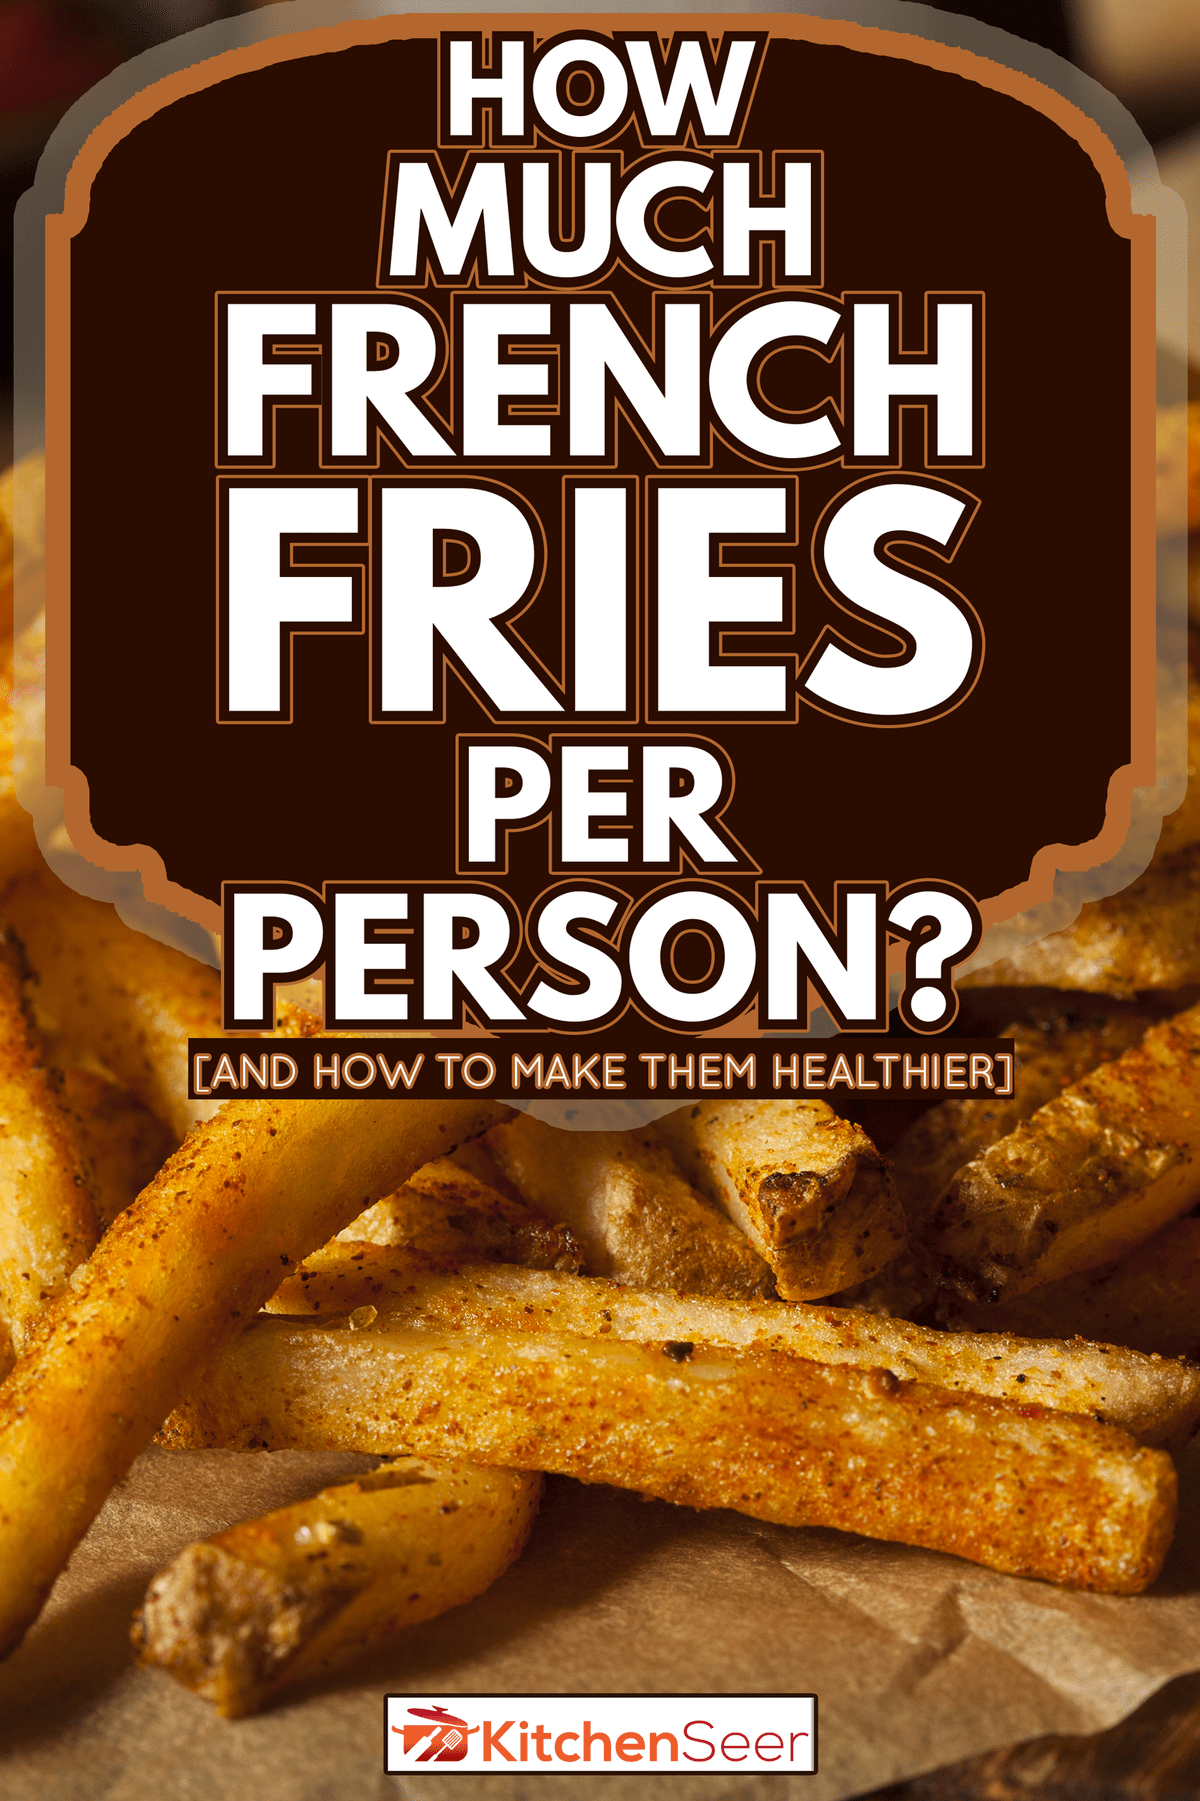 Cajun Seasoned French Fries with Organic Ketchup - How Much French Fries Per Person? [And How To Make Them Healthier]